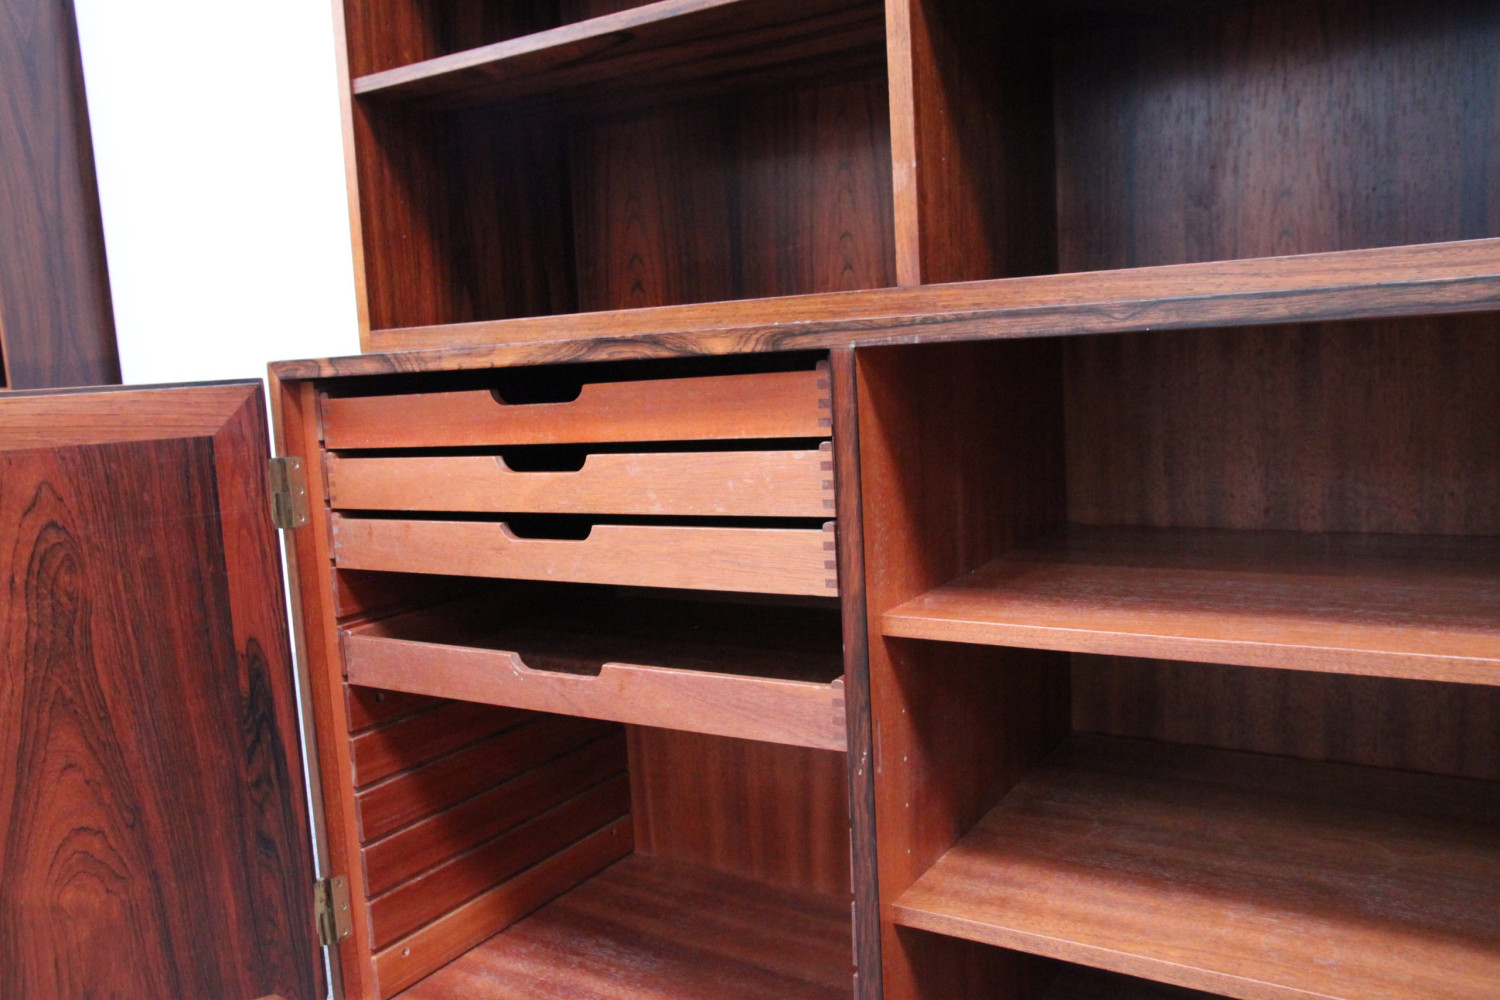 Bookcase by Kai Winding Sold